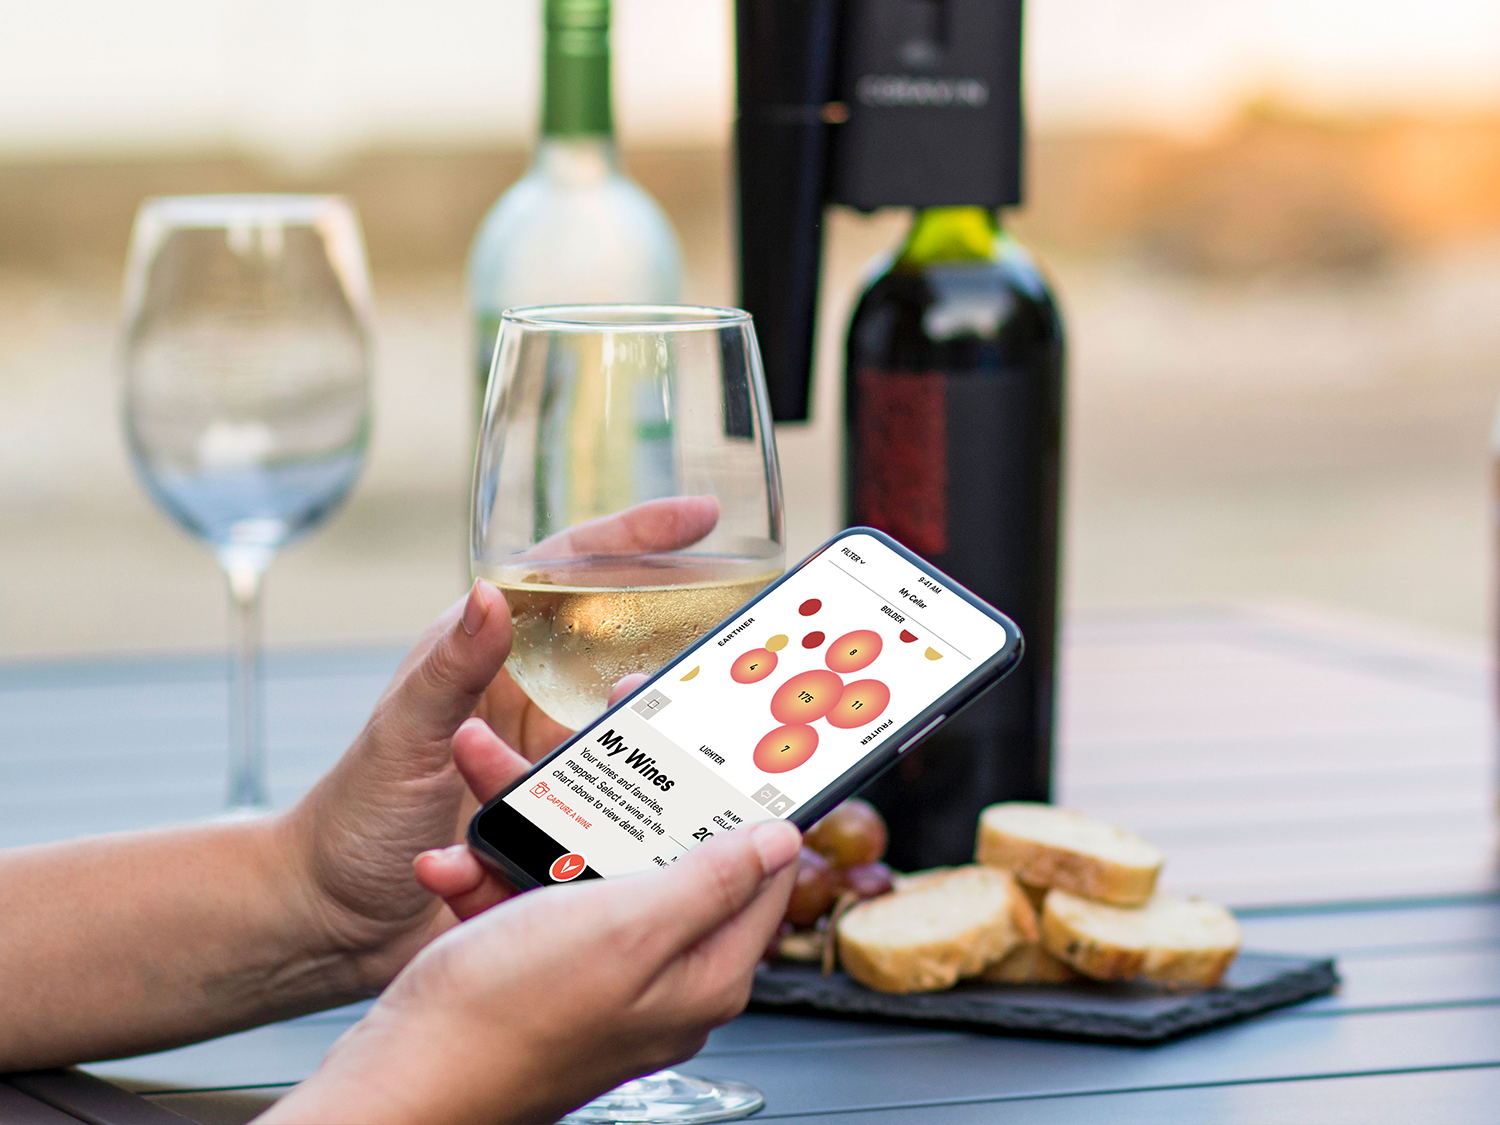 A person holding a glass of wine and a phone that features the Coravin Moments App flavor map screen, with the Coravin Model Eleven Wine Preservation System on bottle in the background.